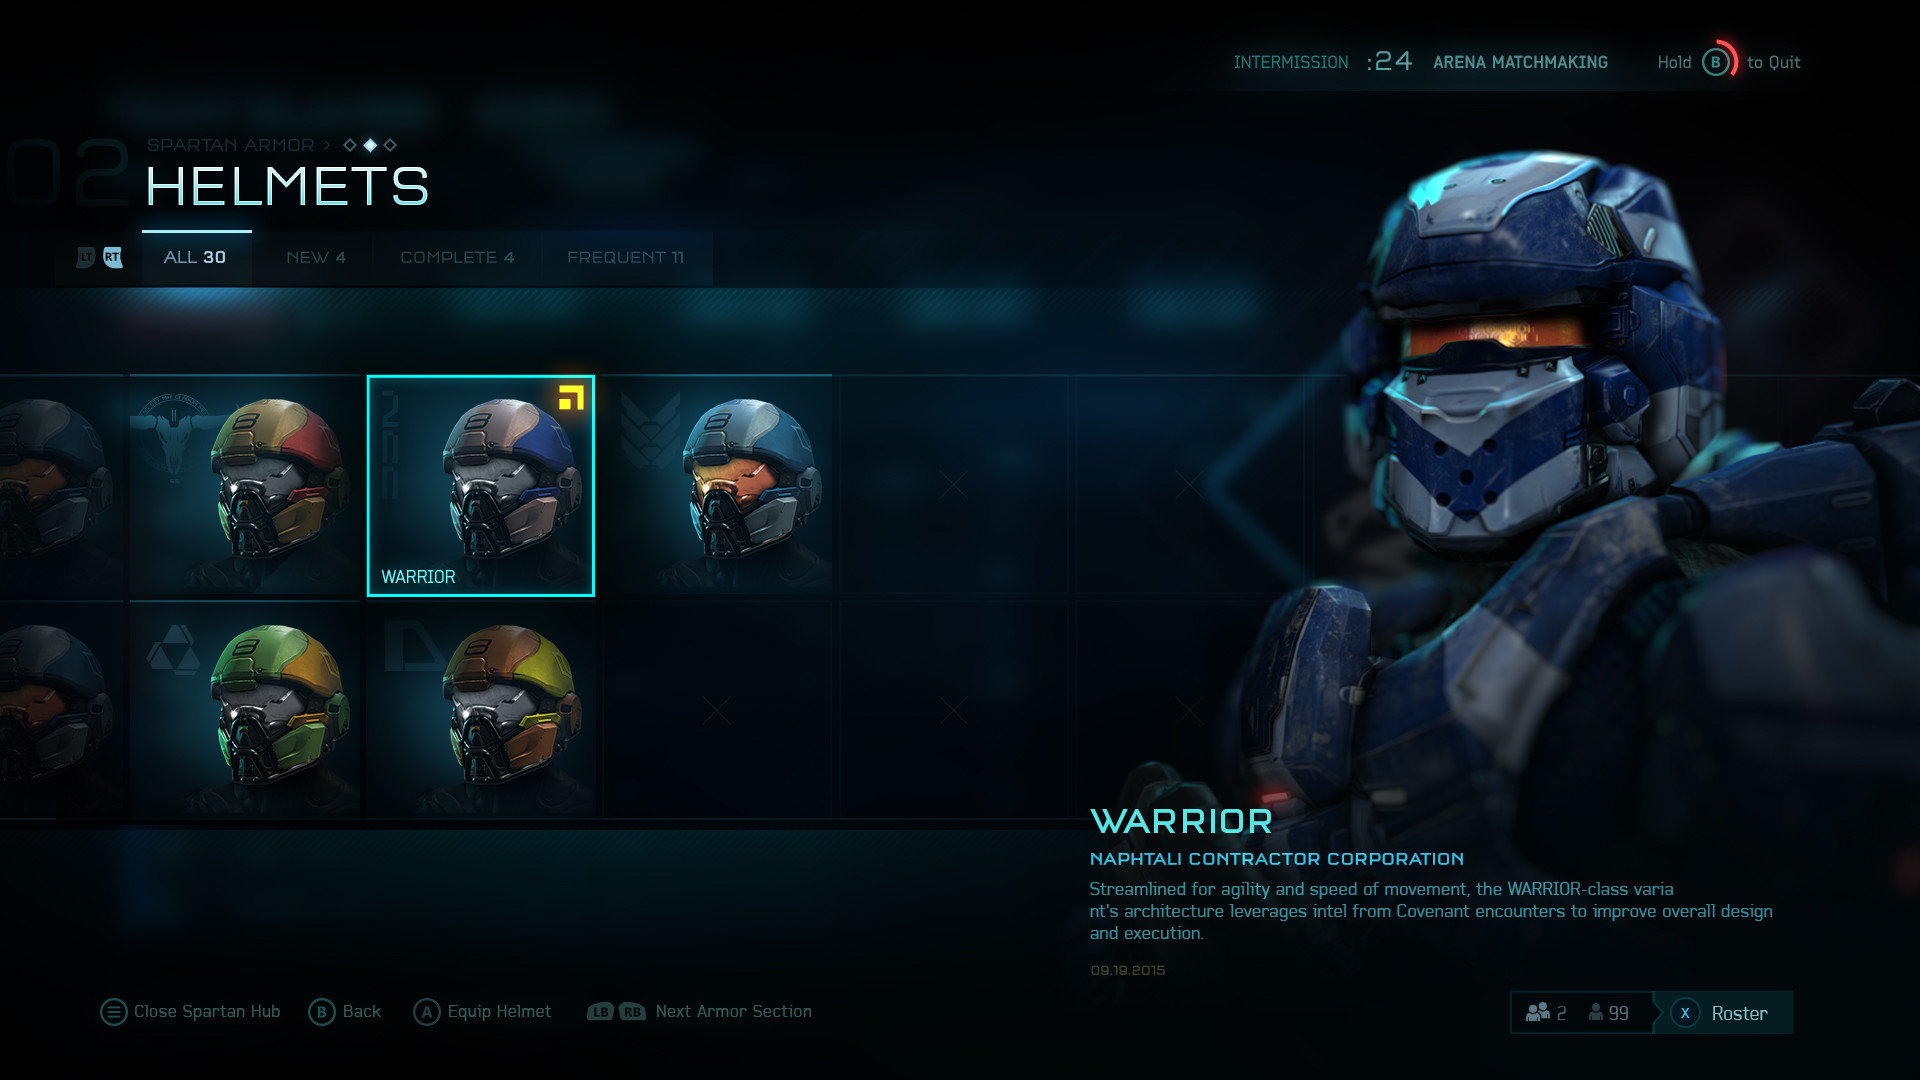 matchmaking halo 5 tapped dating site